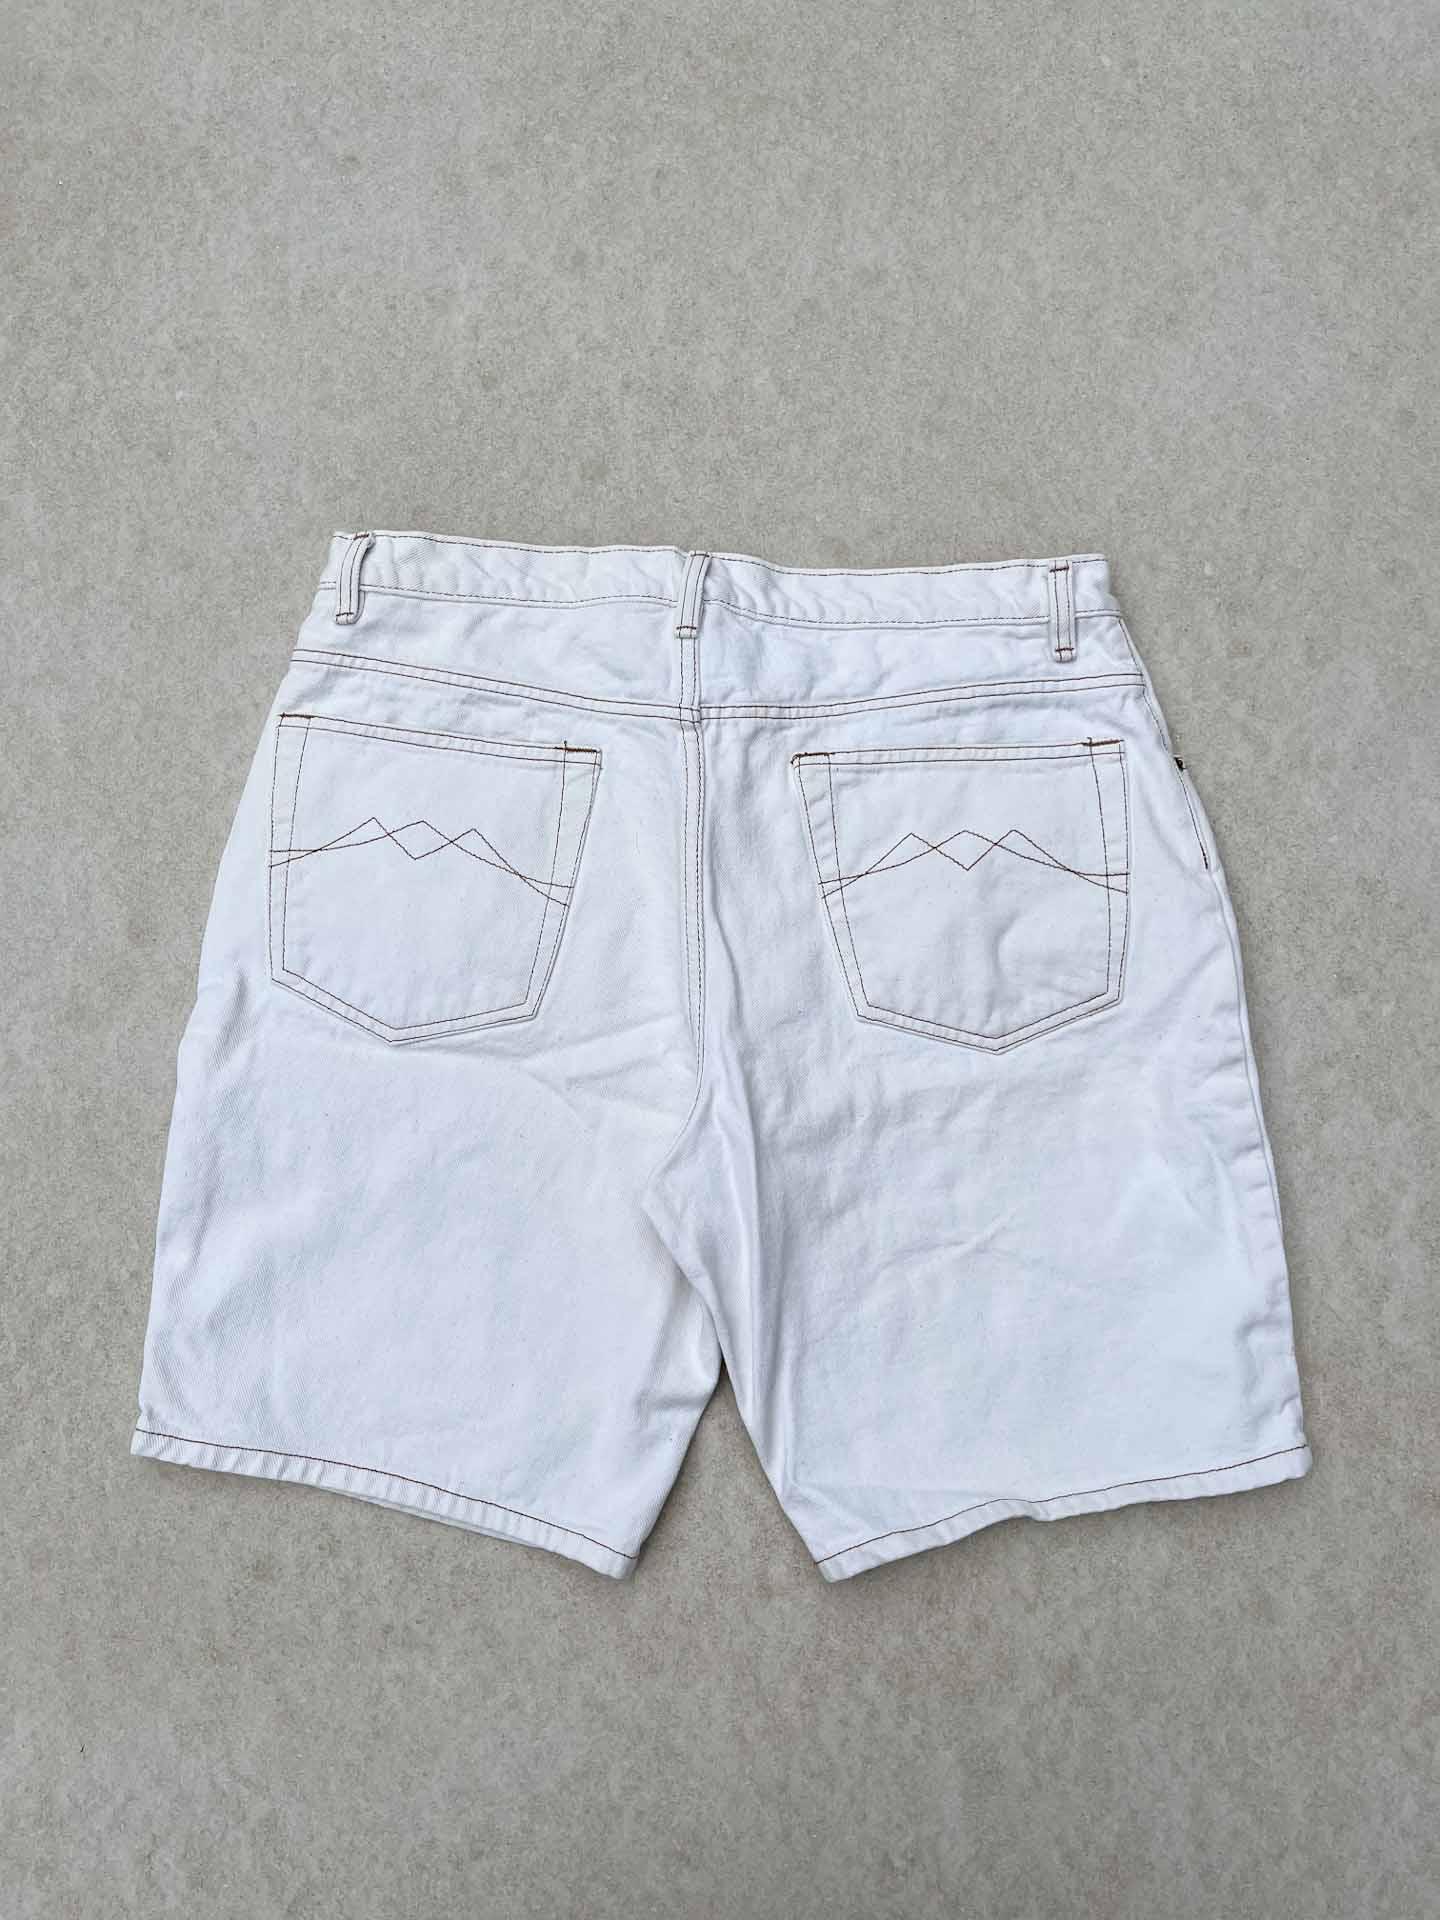 Fade Out (90s C&A) white jorts - secondvintage